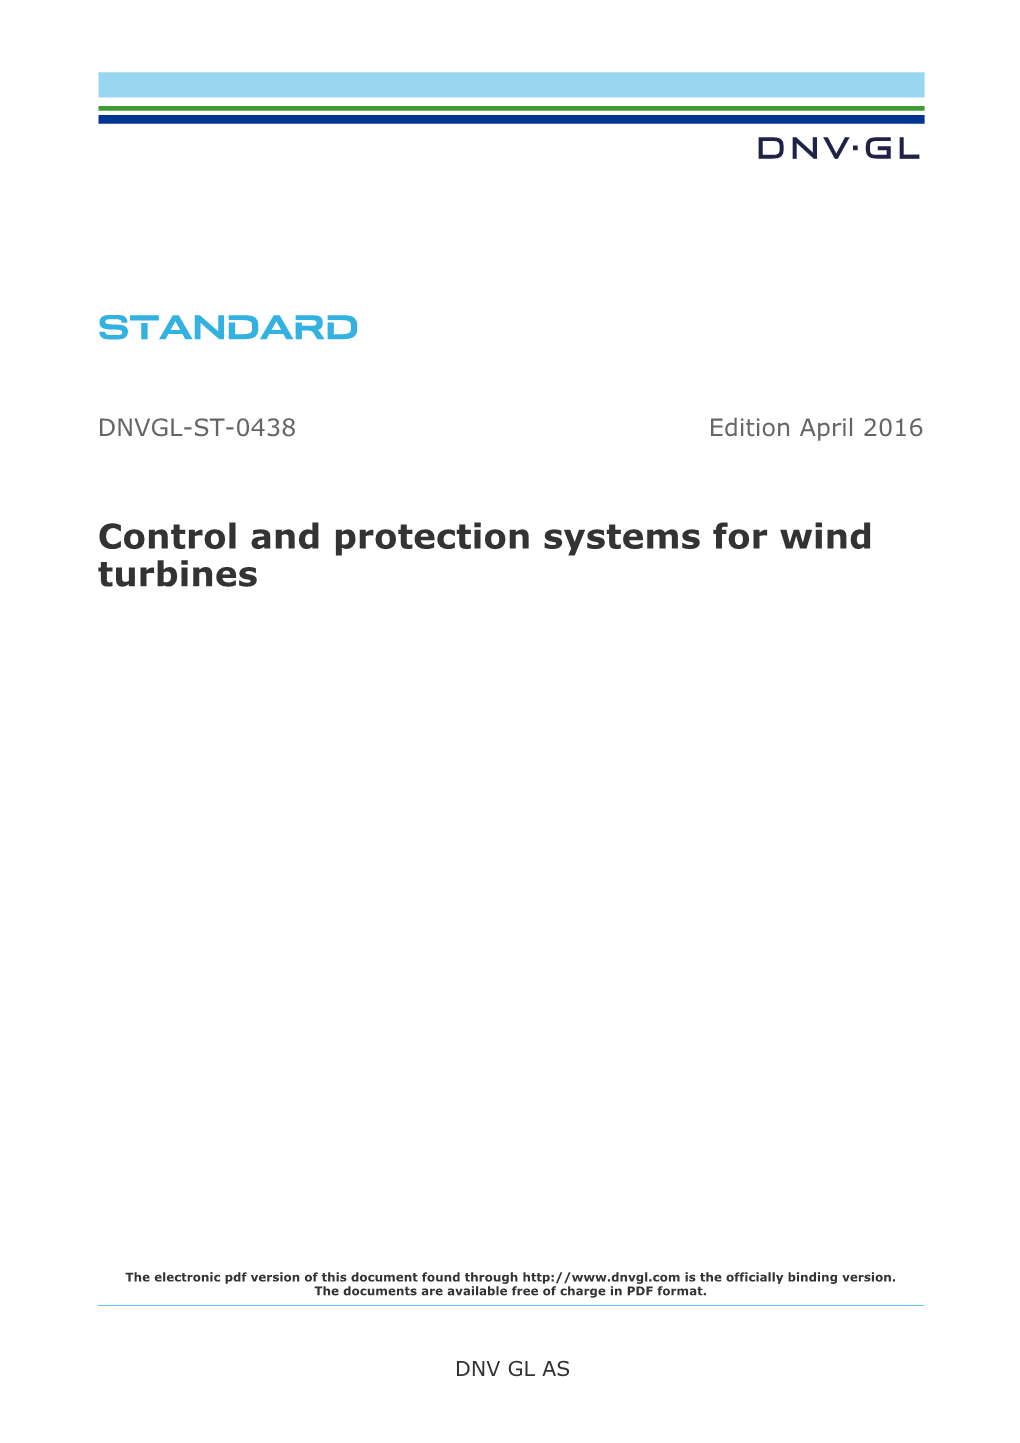 DNVGL-ST-0438 Control and Protection Systems for Wind Turbines